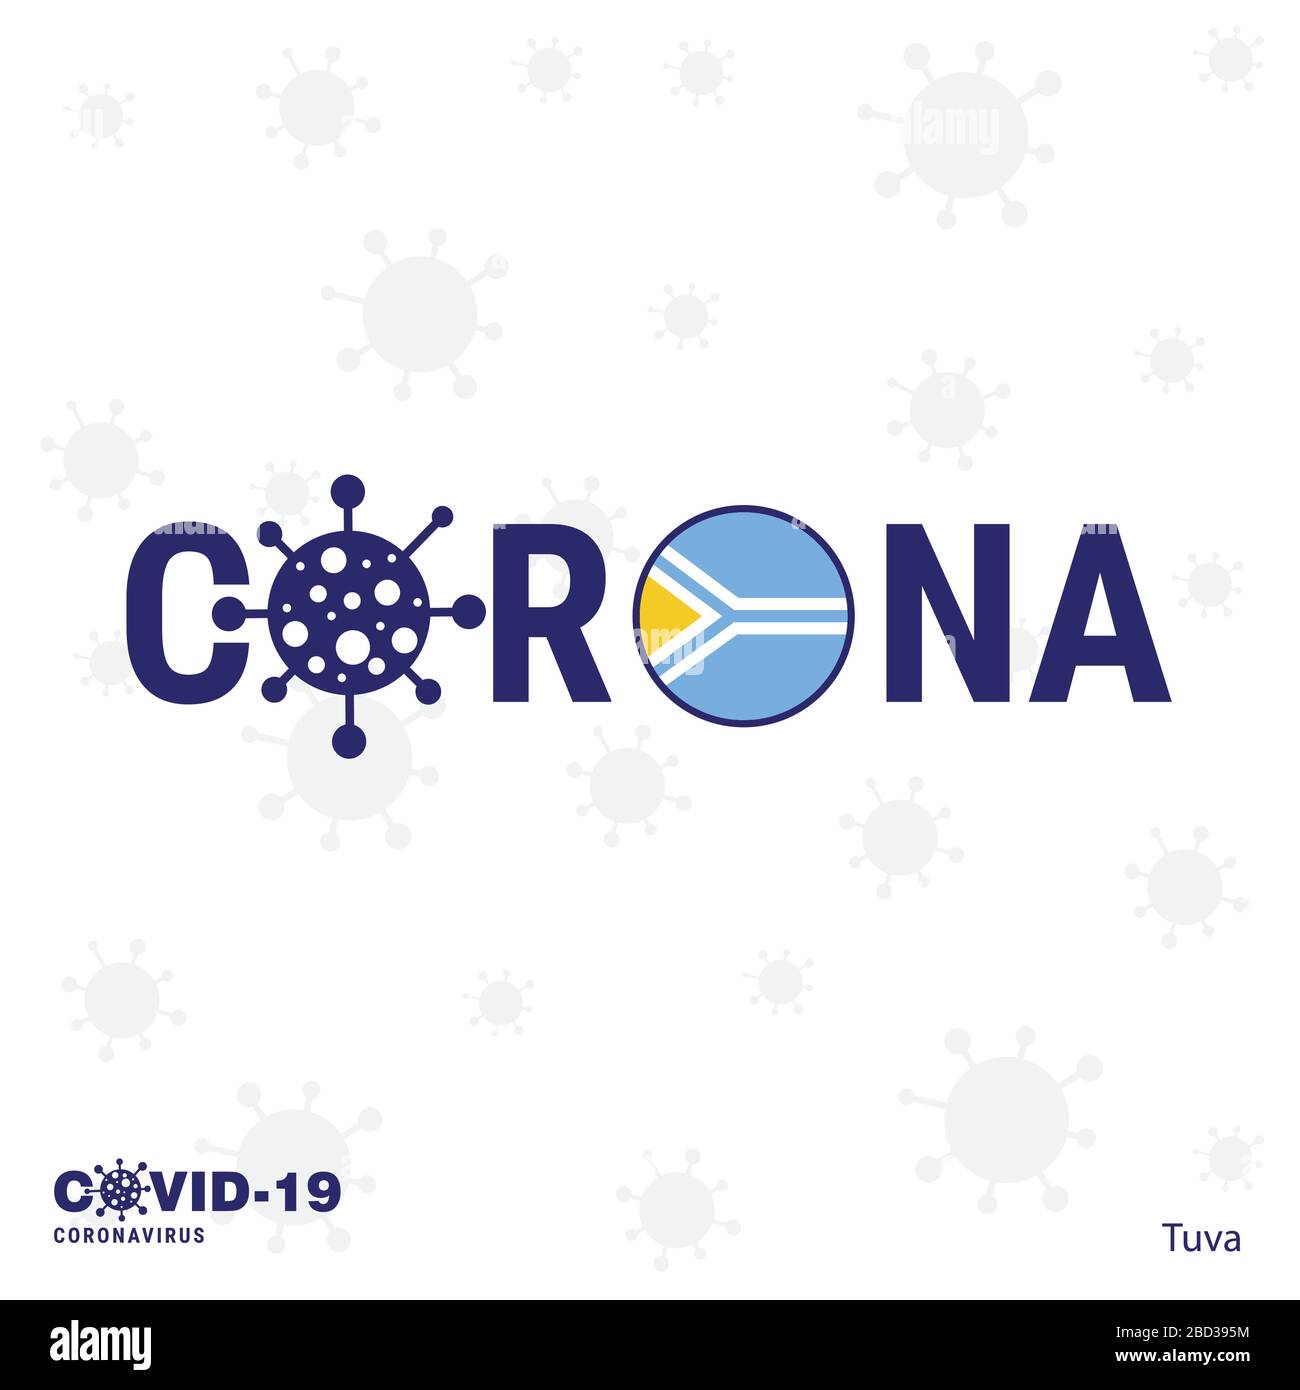 Tuva Coronavirus Typography. COVID-19 country banner. Stay home, Stay Healthy. Take care of your own health Stock Vector